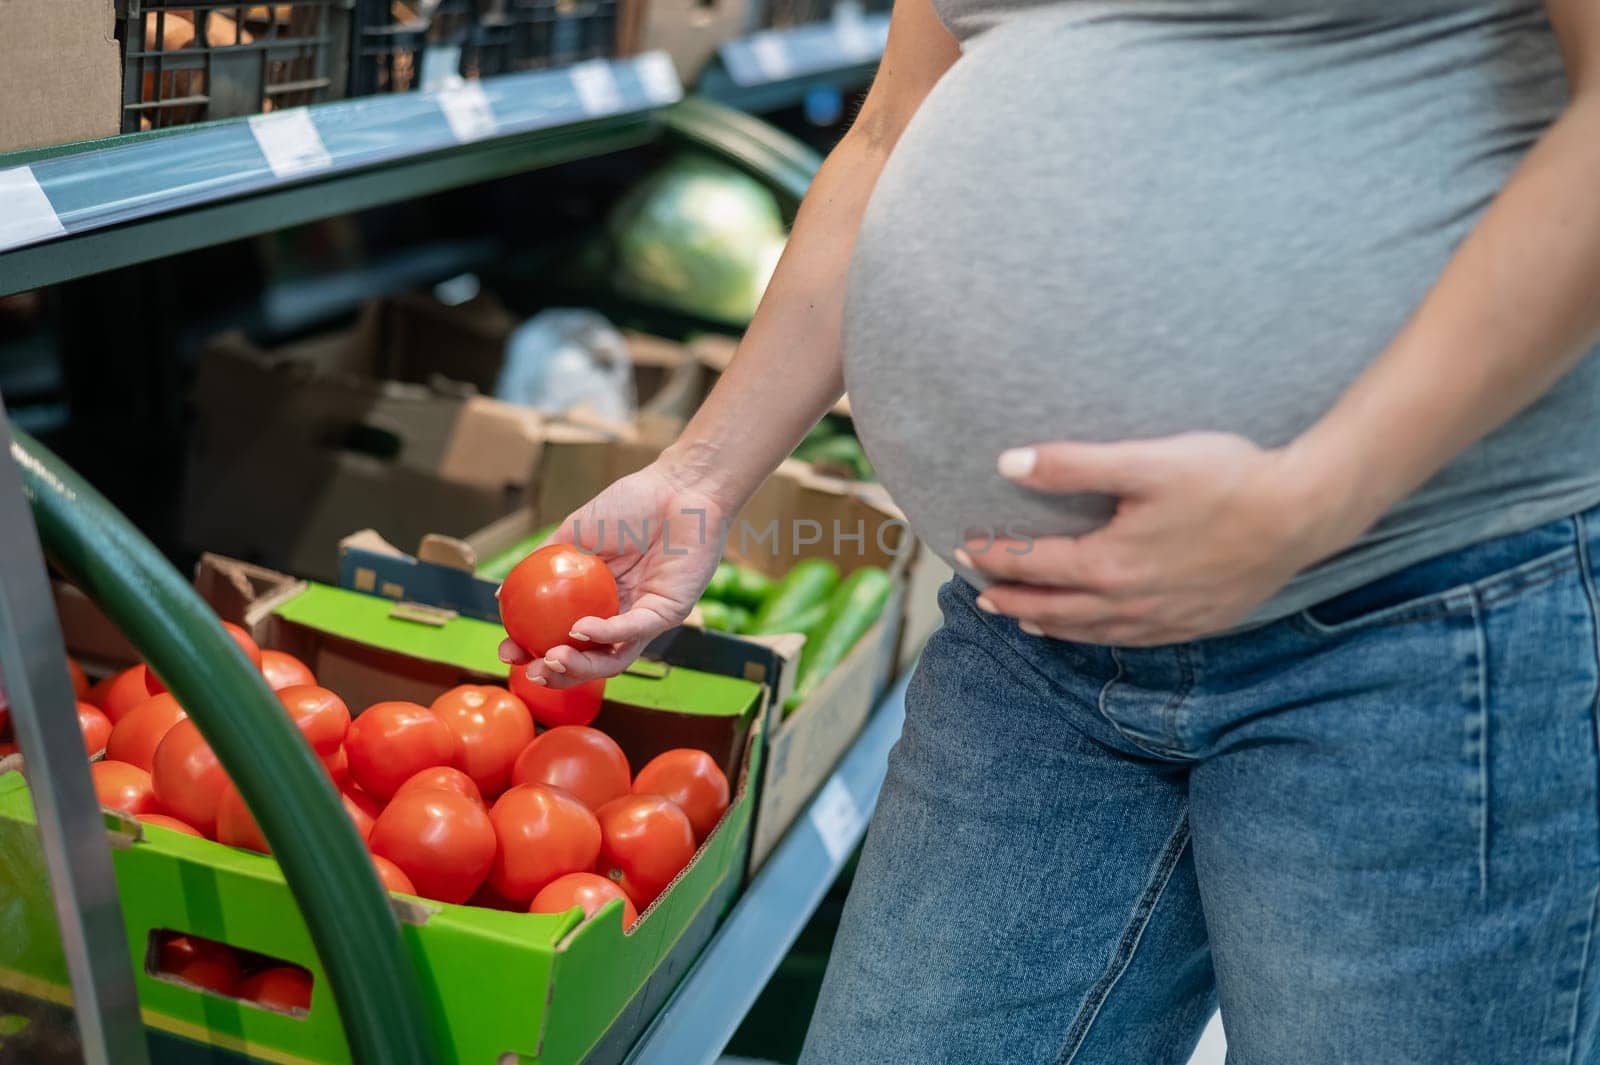 Pregnant woman buys tomatoes in the store. by mrwed54